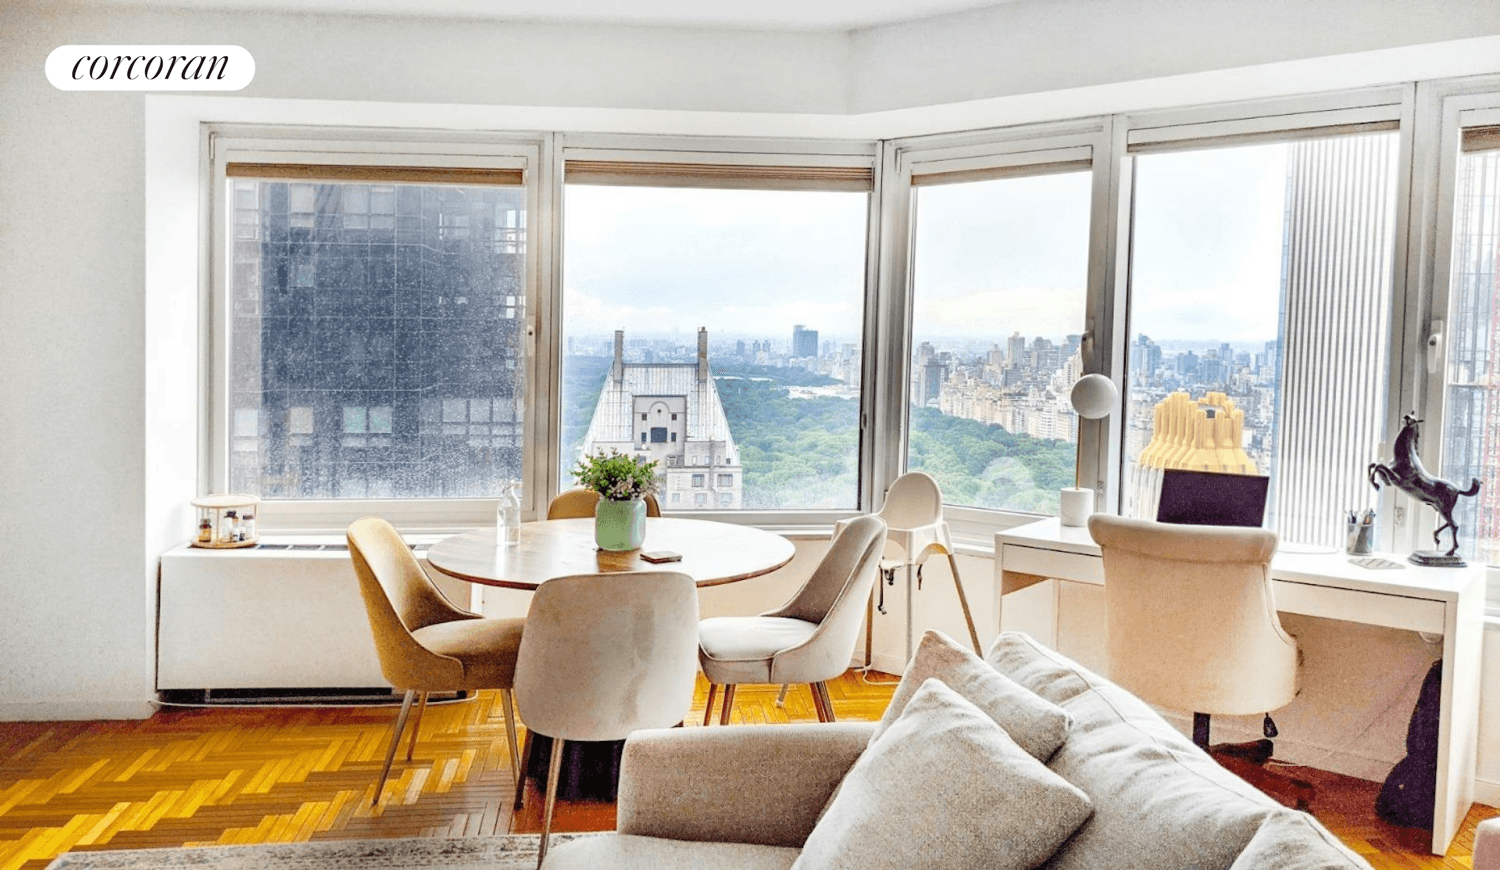 Fantastic Panoramic Northern, Eastern and Central Park Views from this 45th floor apartment.